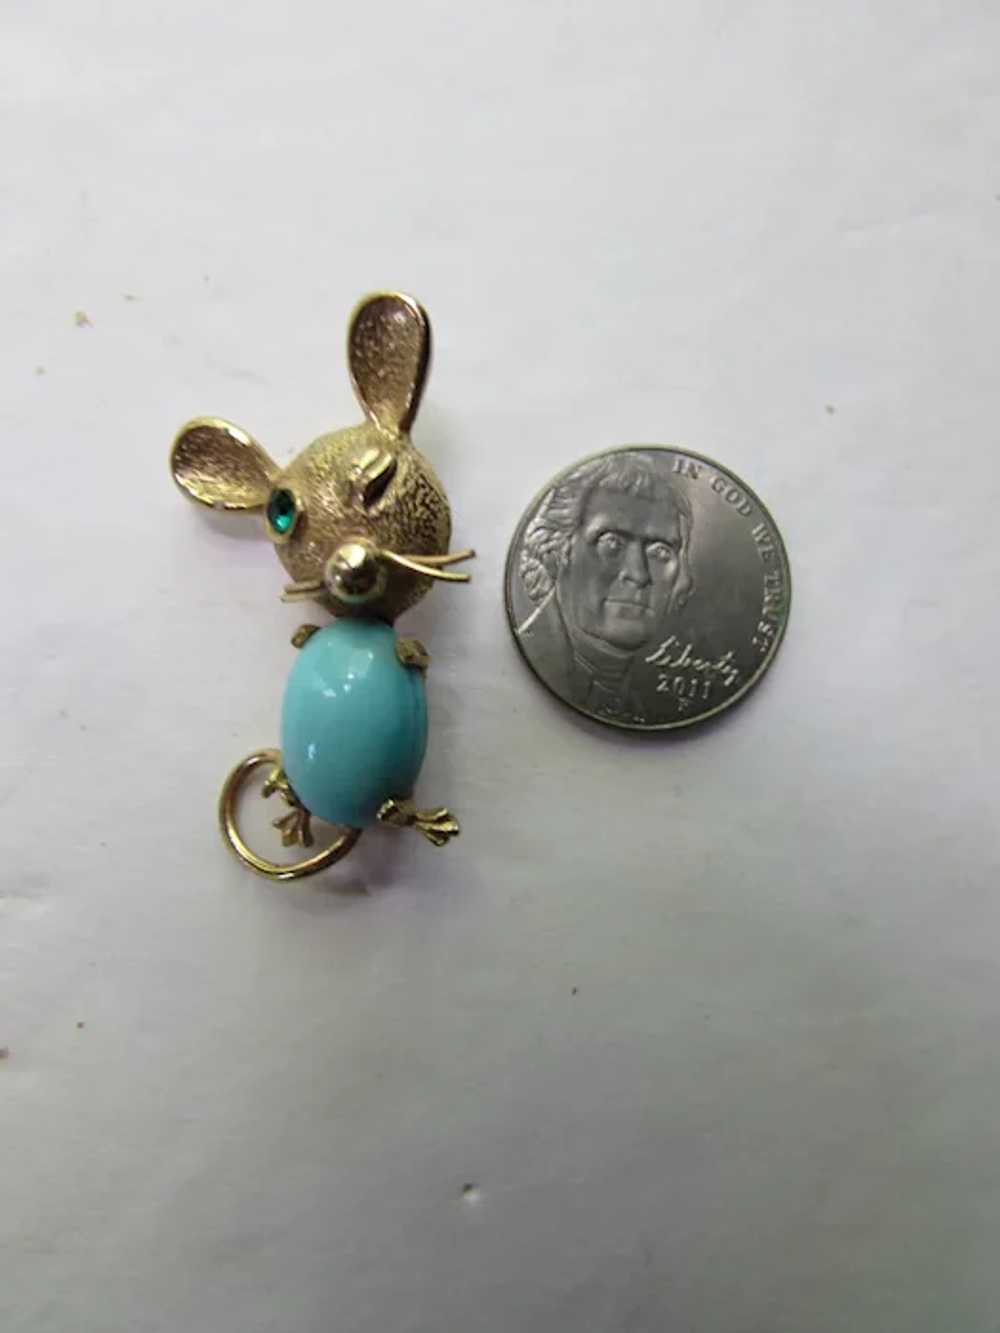 Whimsical Castlecliff Winking Mouse Brooch - image 7